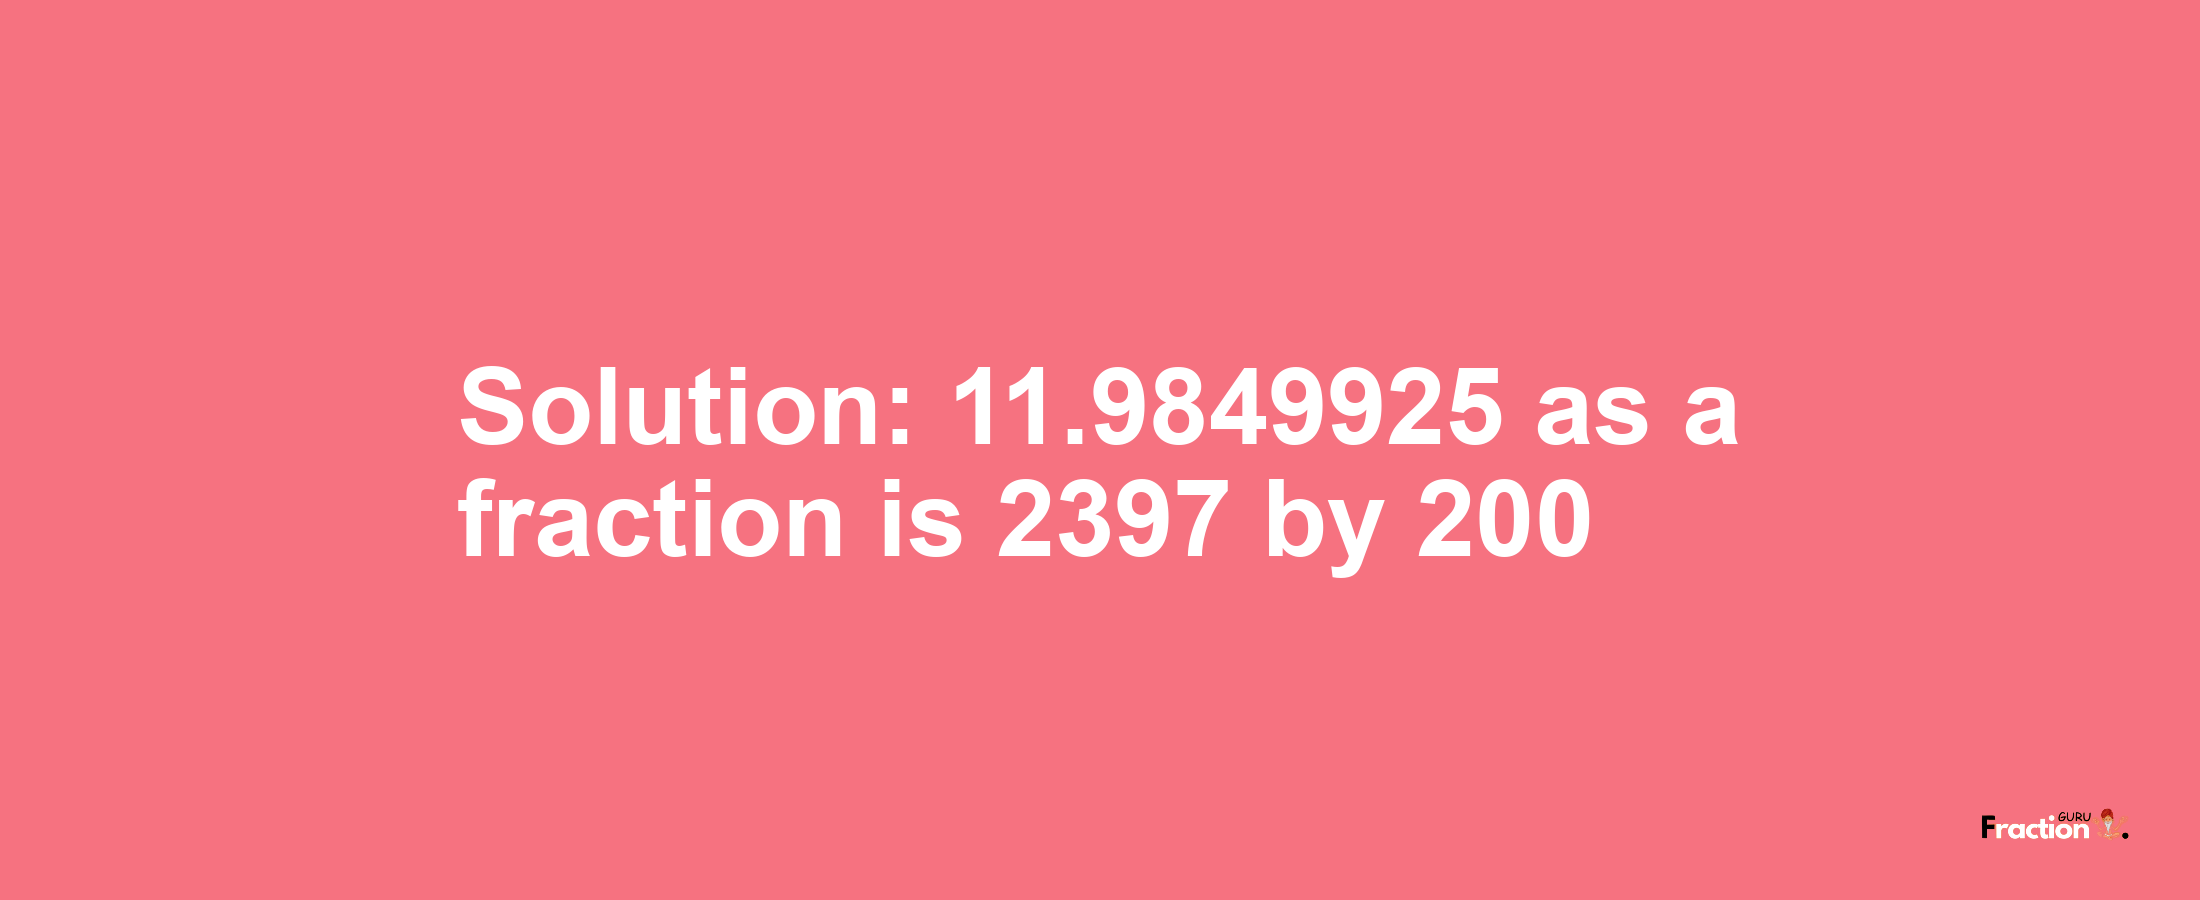 Solution:11.9849925 as a fraction is 2397/200